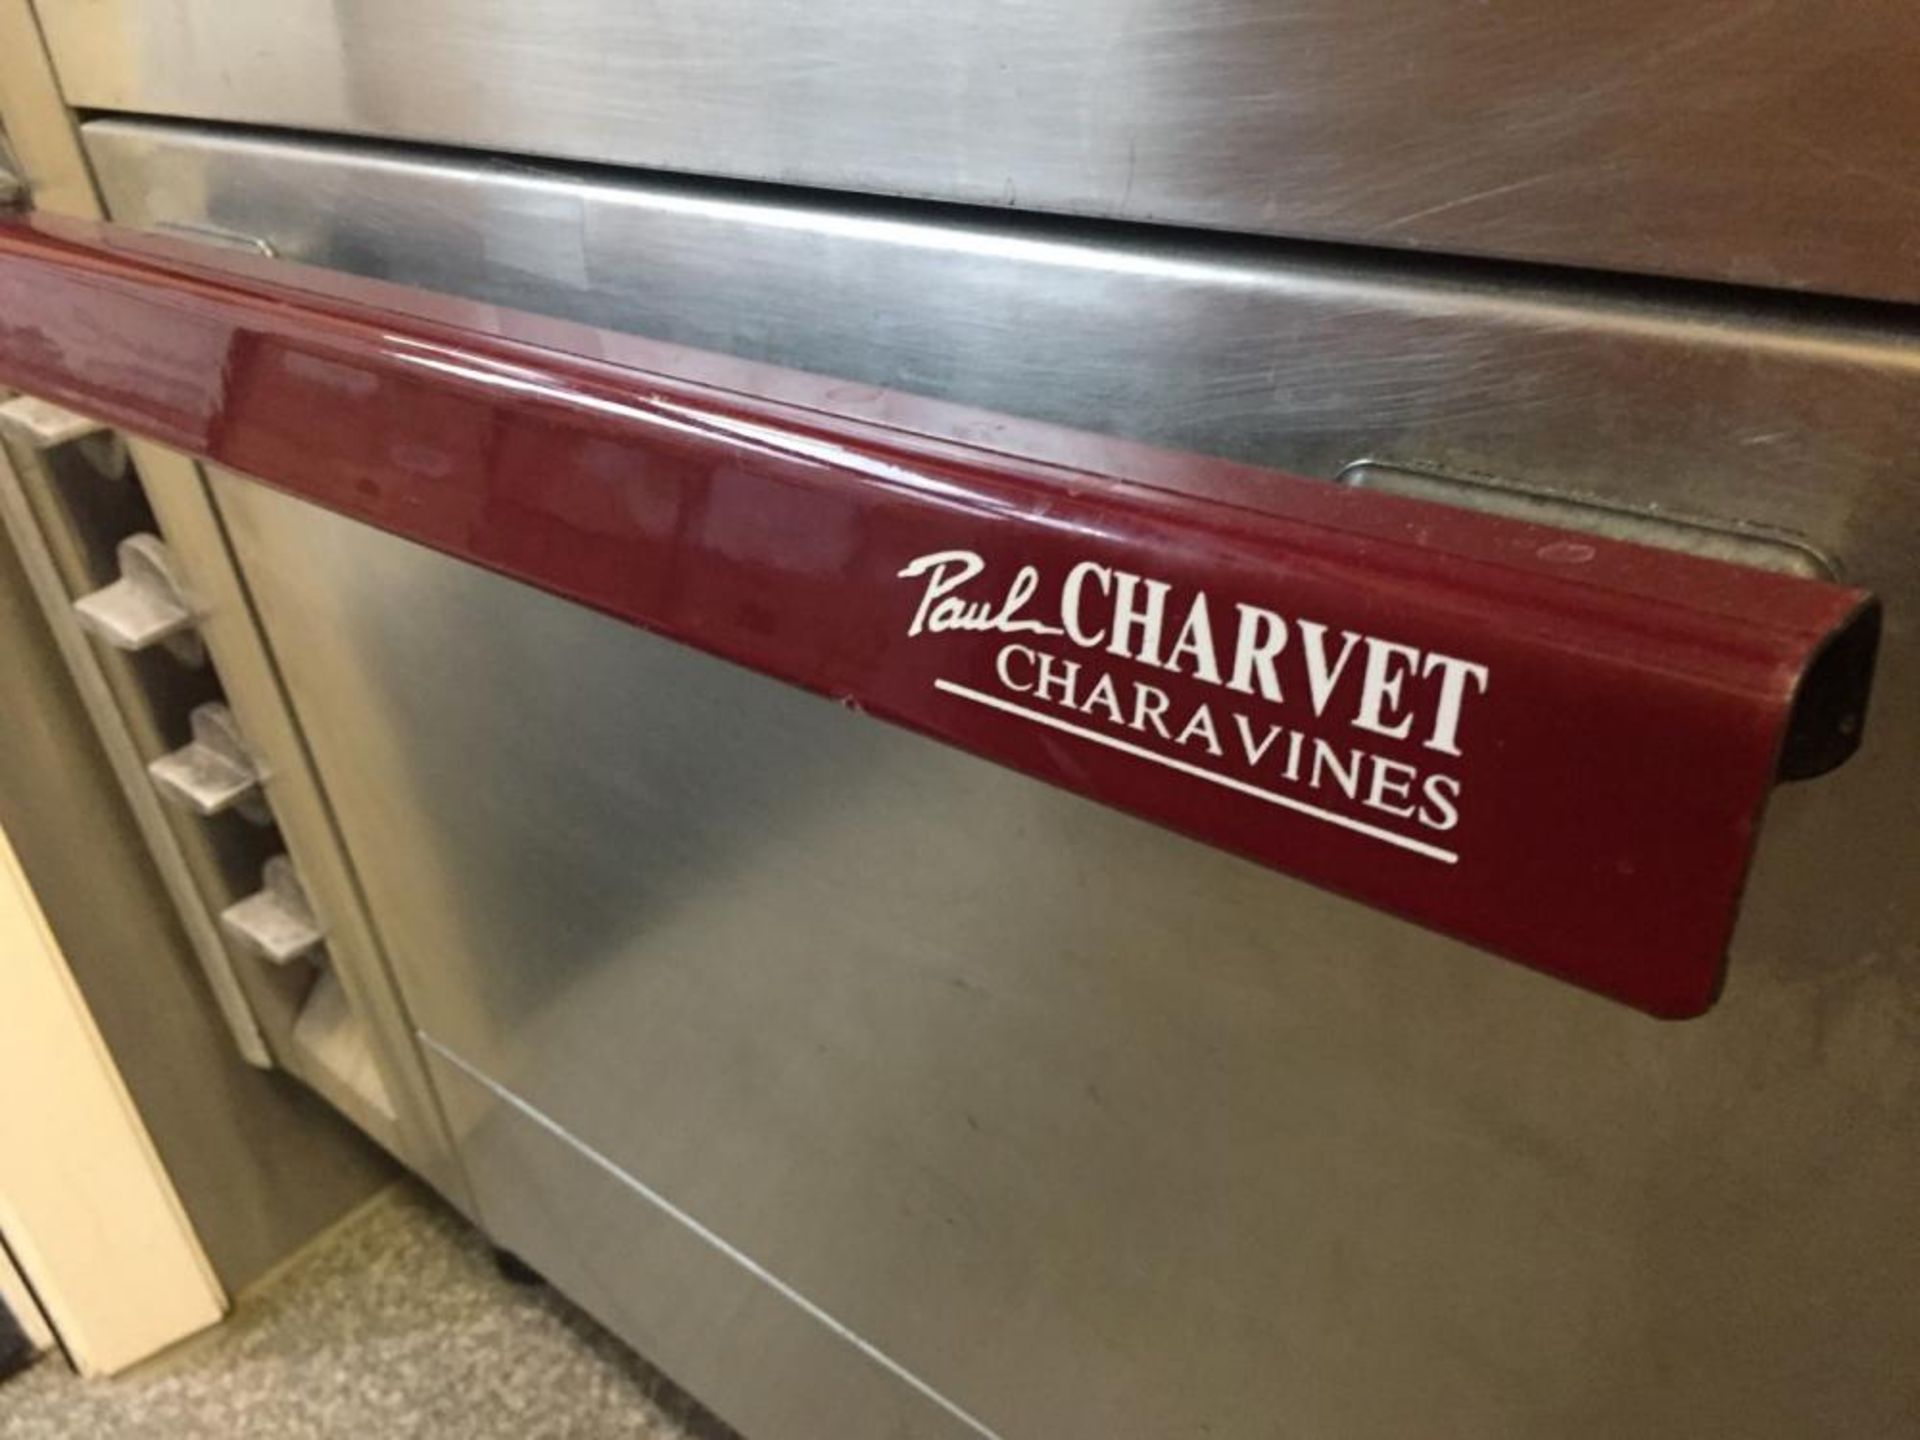 1 x Paul Charvet Charavines Heavy Duty Commercial Oven - Model: Pro 800 - Stainless Steel - - Image 9 of 9